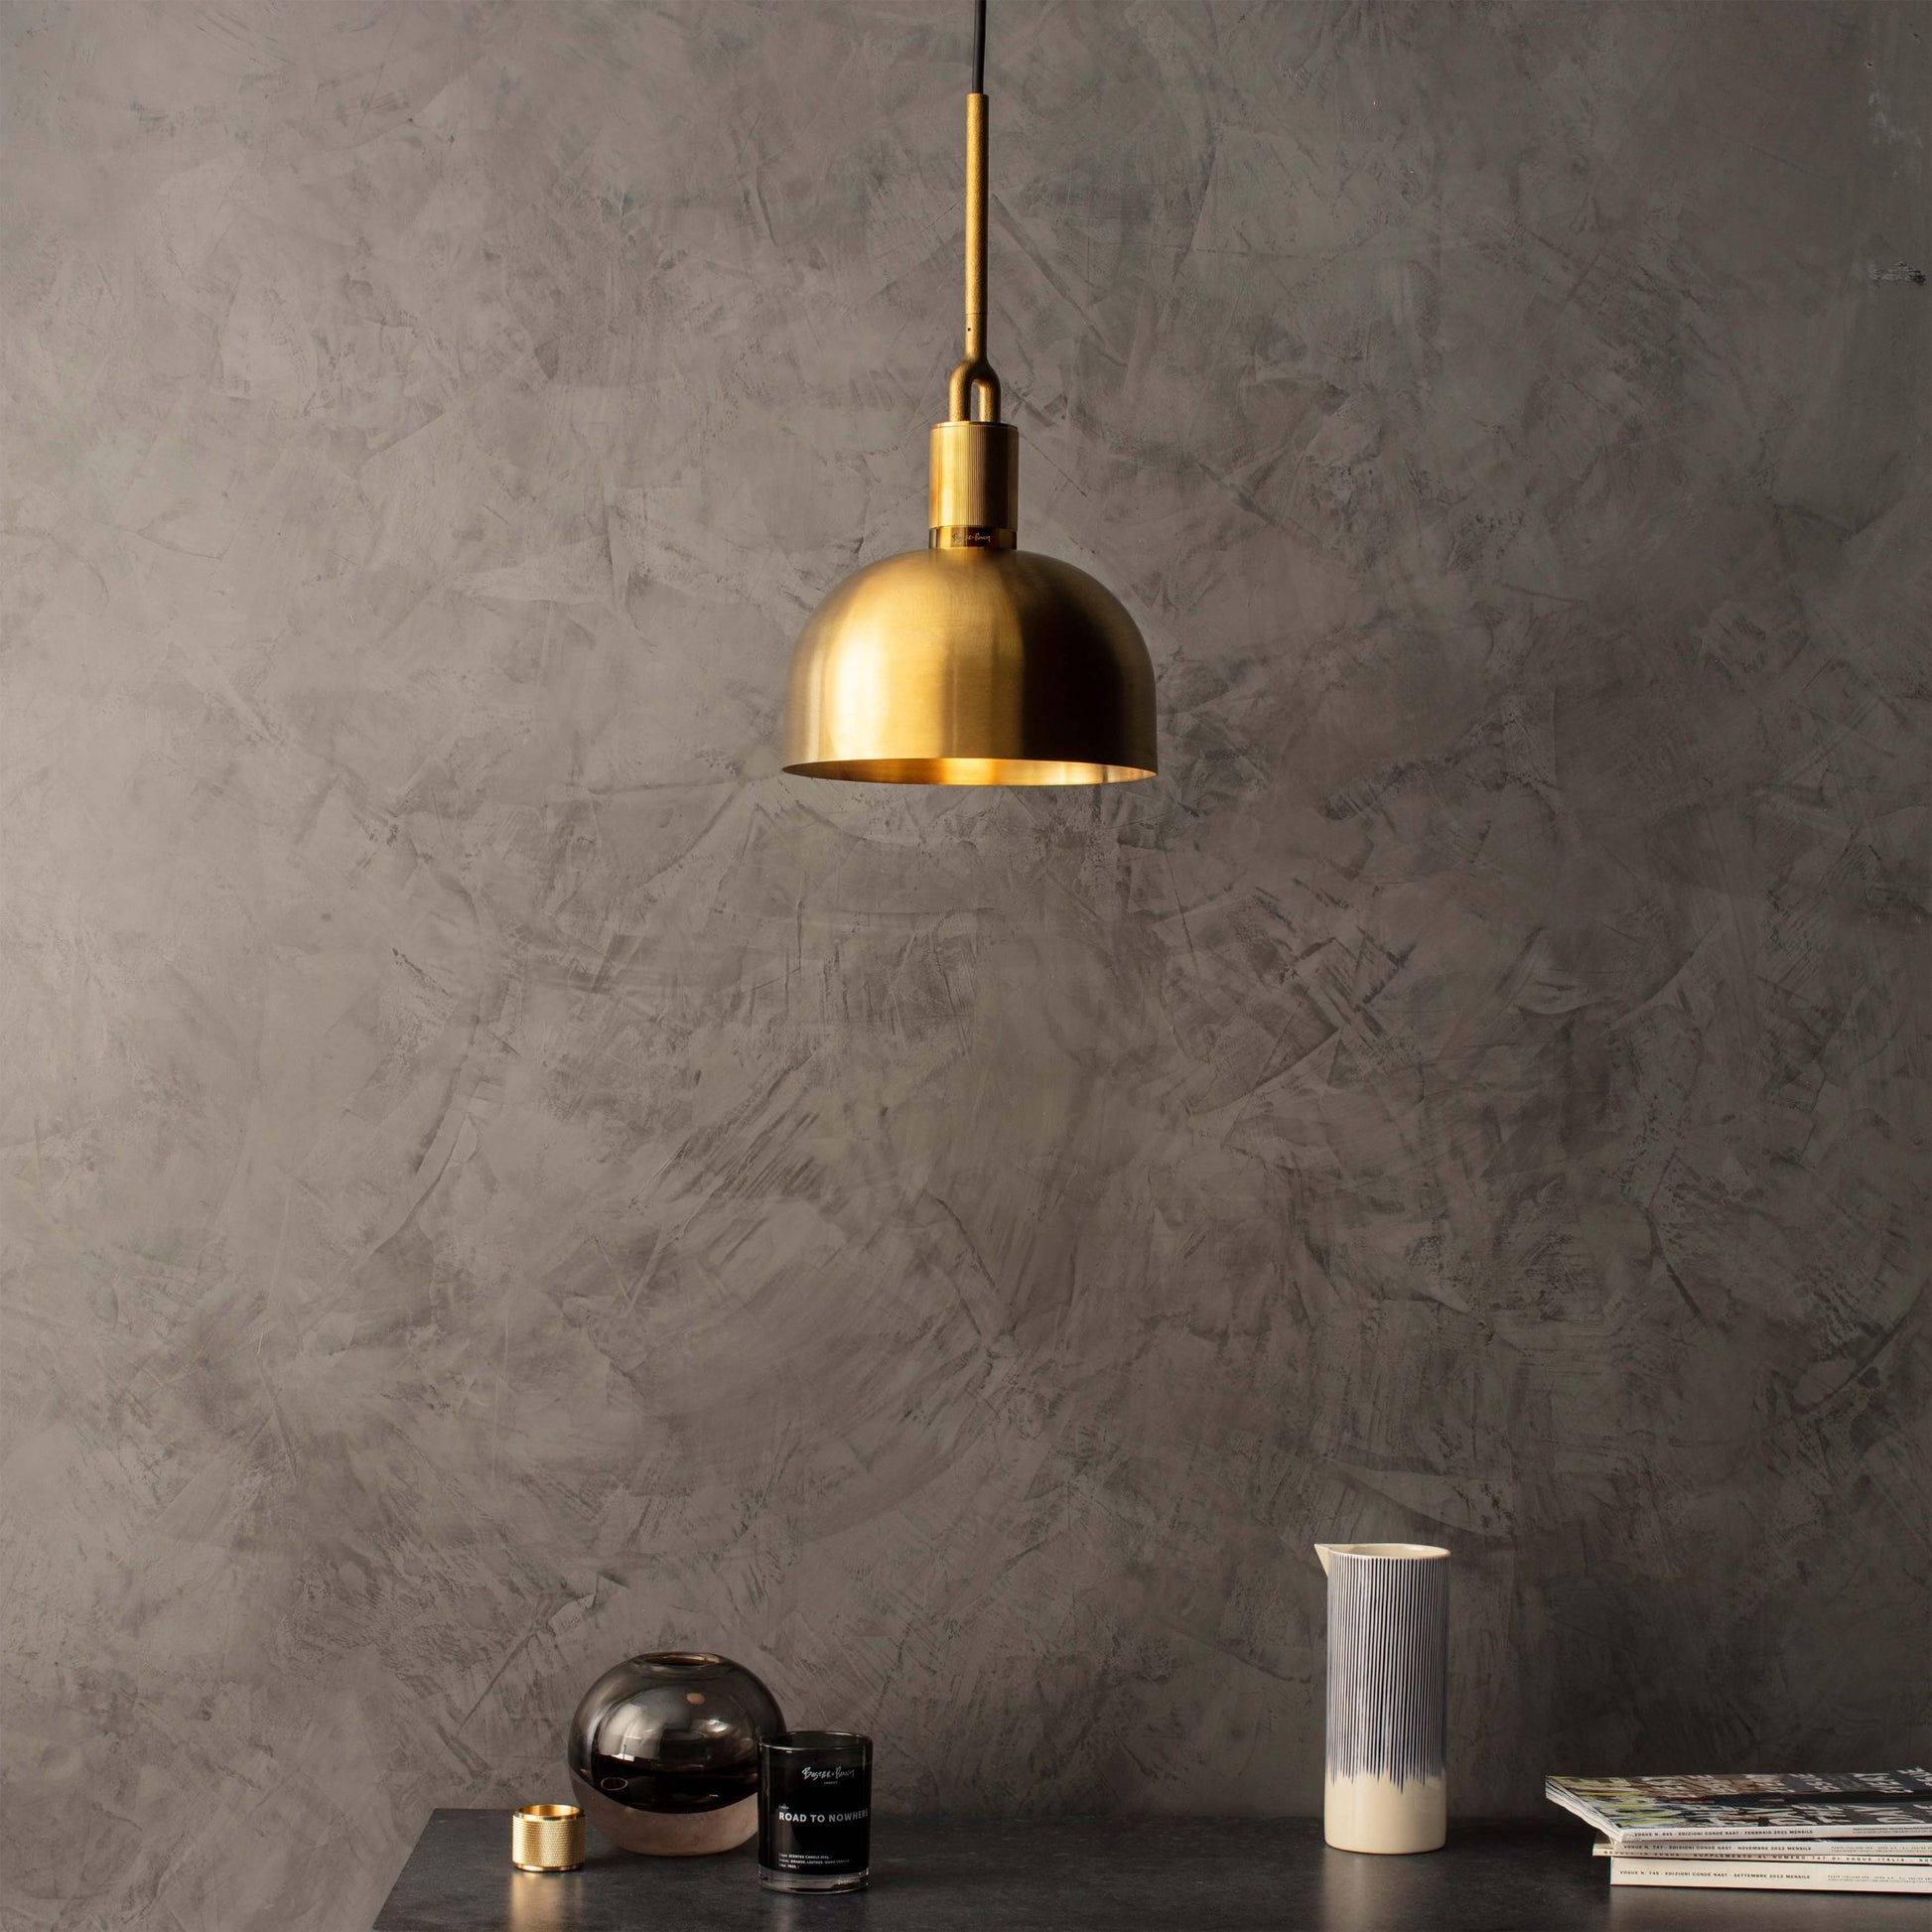 Forked Pendant Light / Shade / Medium brass, front view in setting.